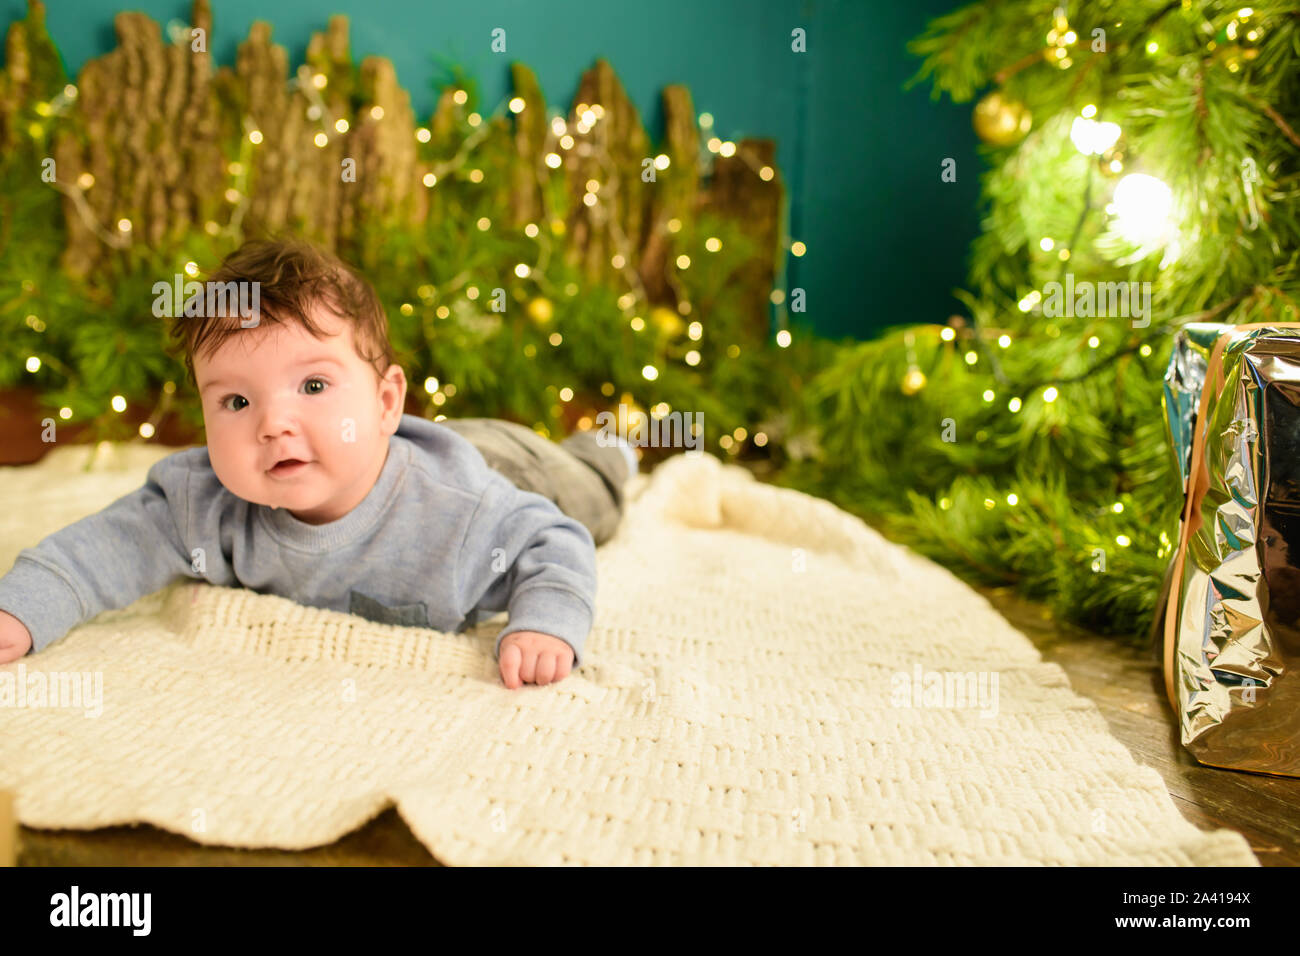 A child near the Christmas tree. Little boy celebrating christmas. baby's first christmas. Stock Photo